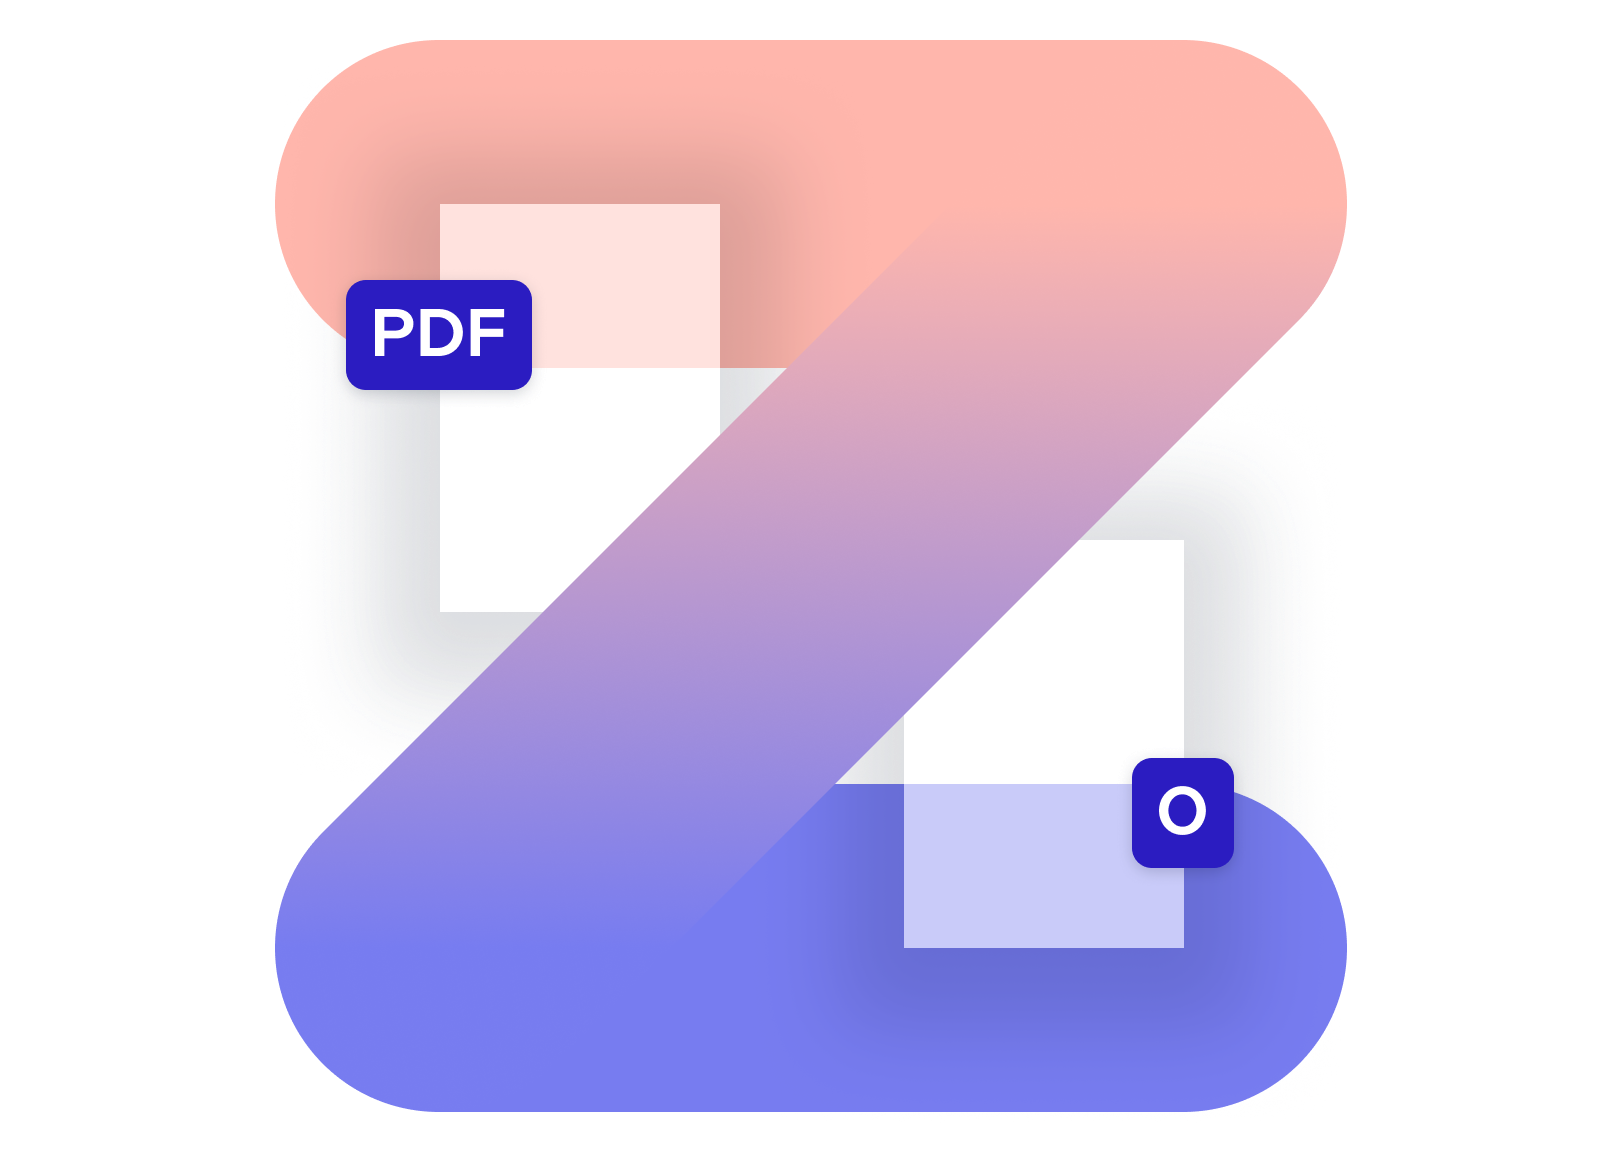 Abstract Illustration of PDF files being converted to Office files